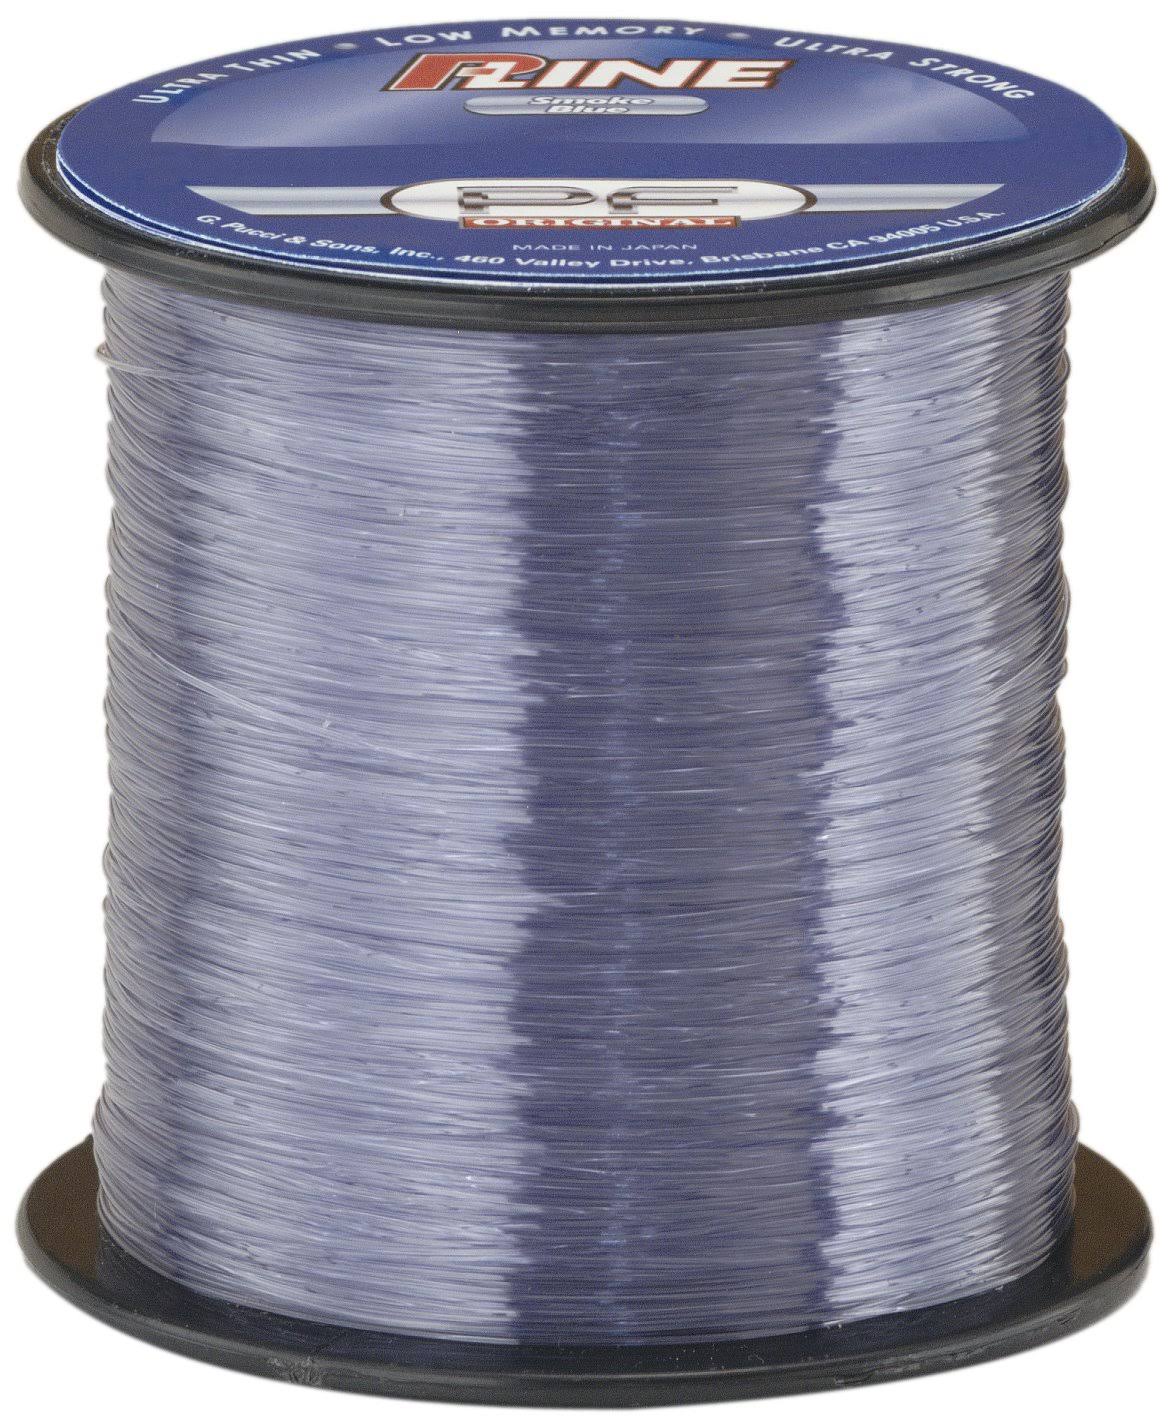 P Line Copolymer Fishing Line - Clear/Blue, 12 Pound